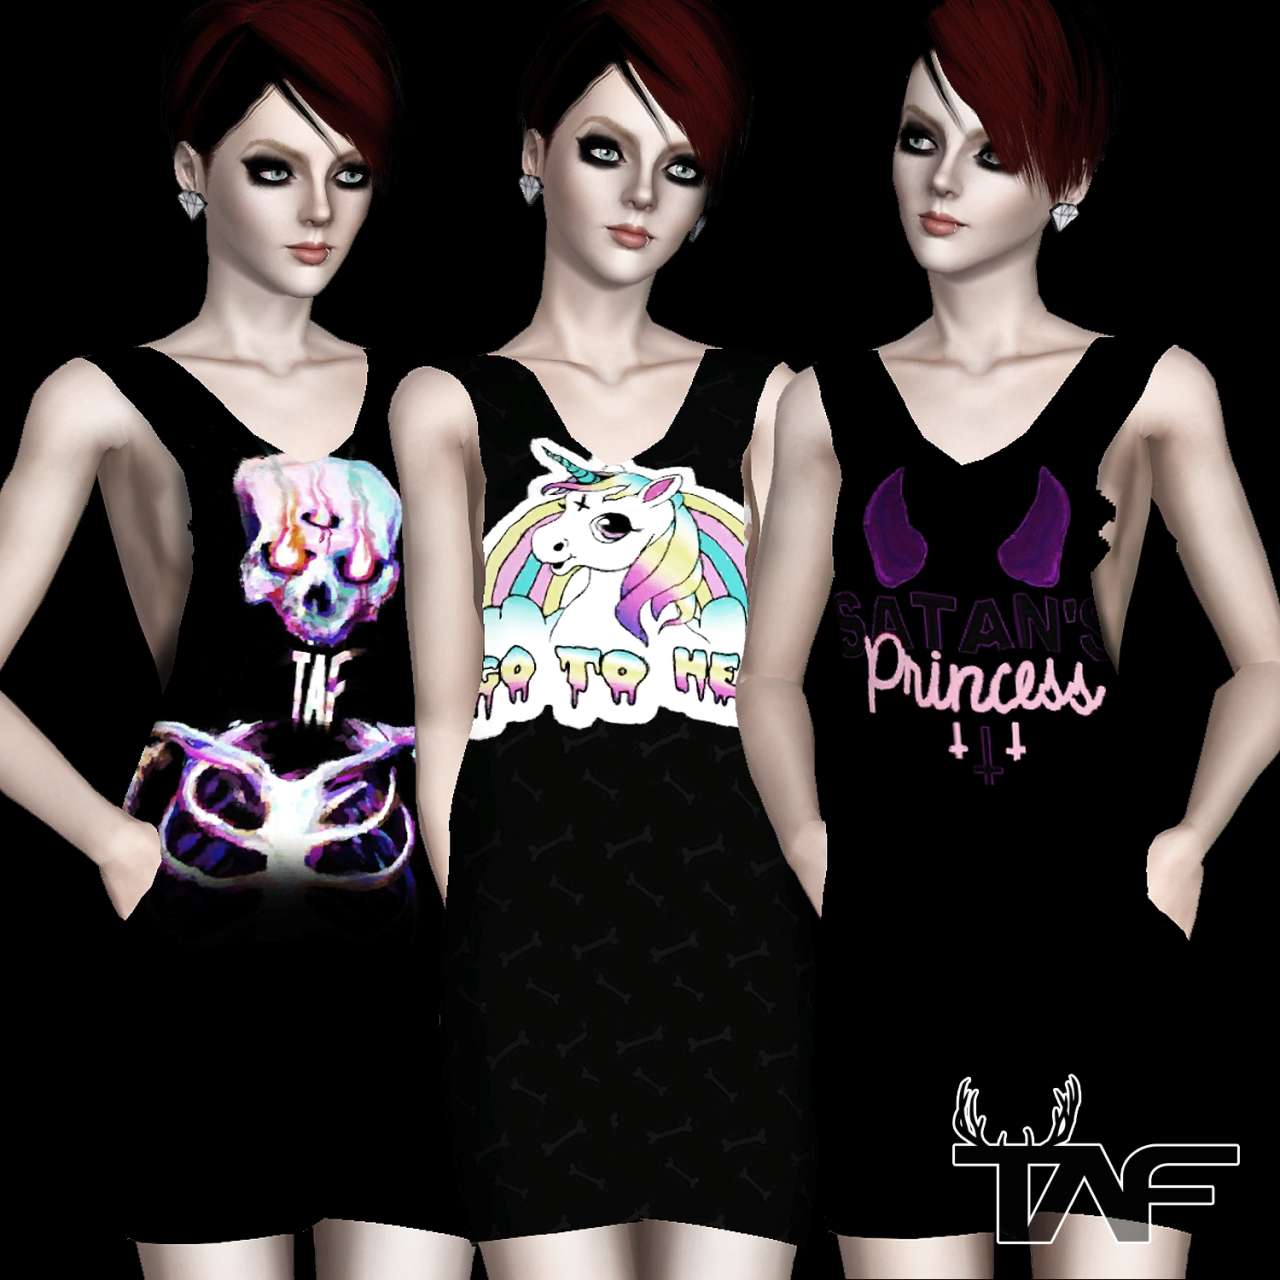 the sims 3 cc clothing